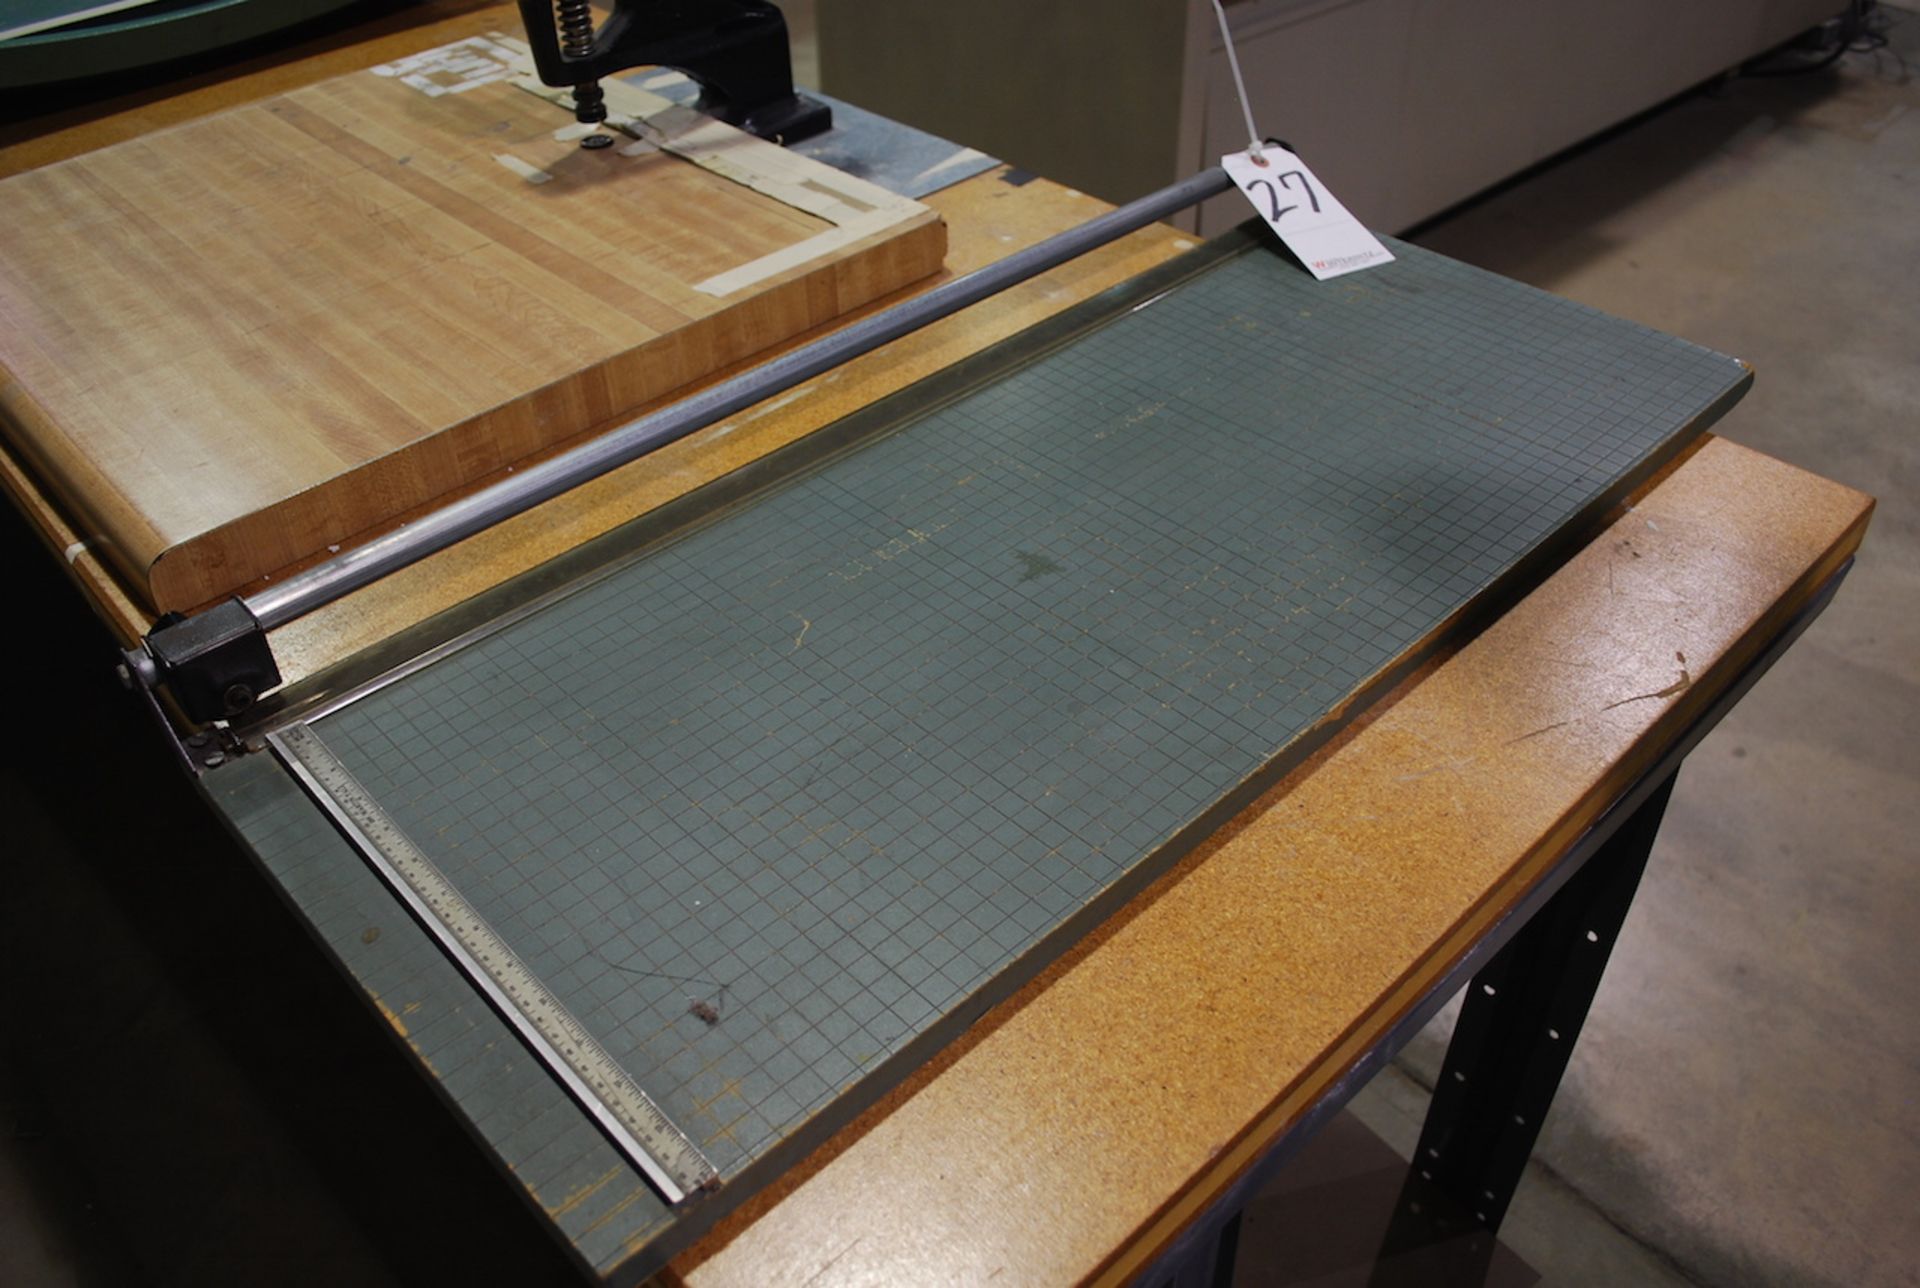 30" ROTARY KNIFE PAPER CUTTER